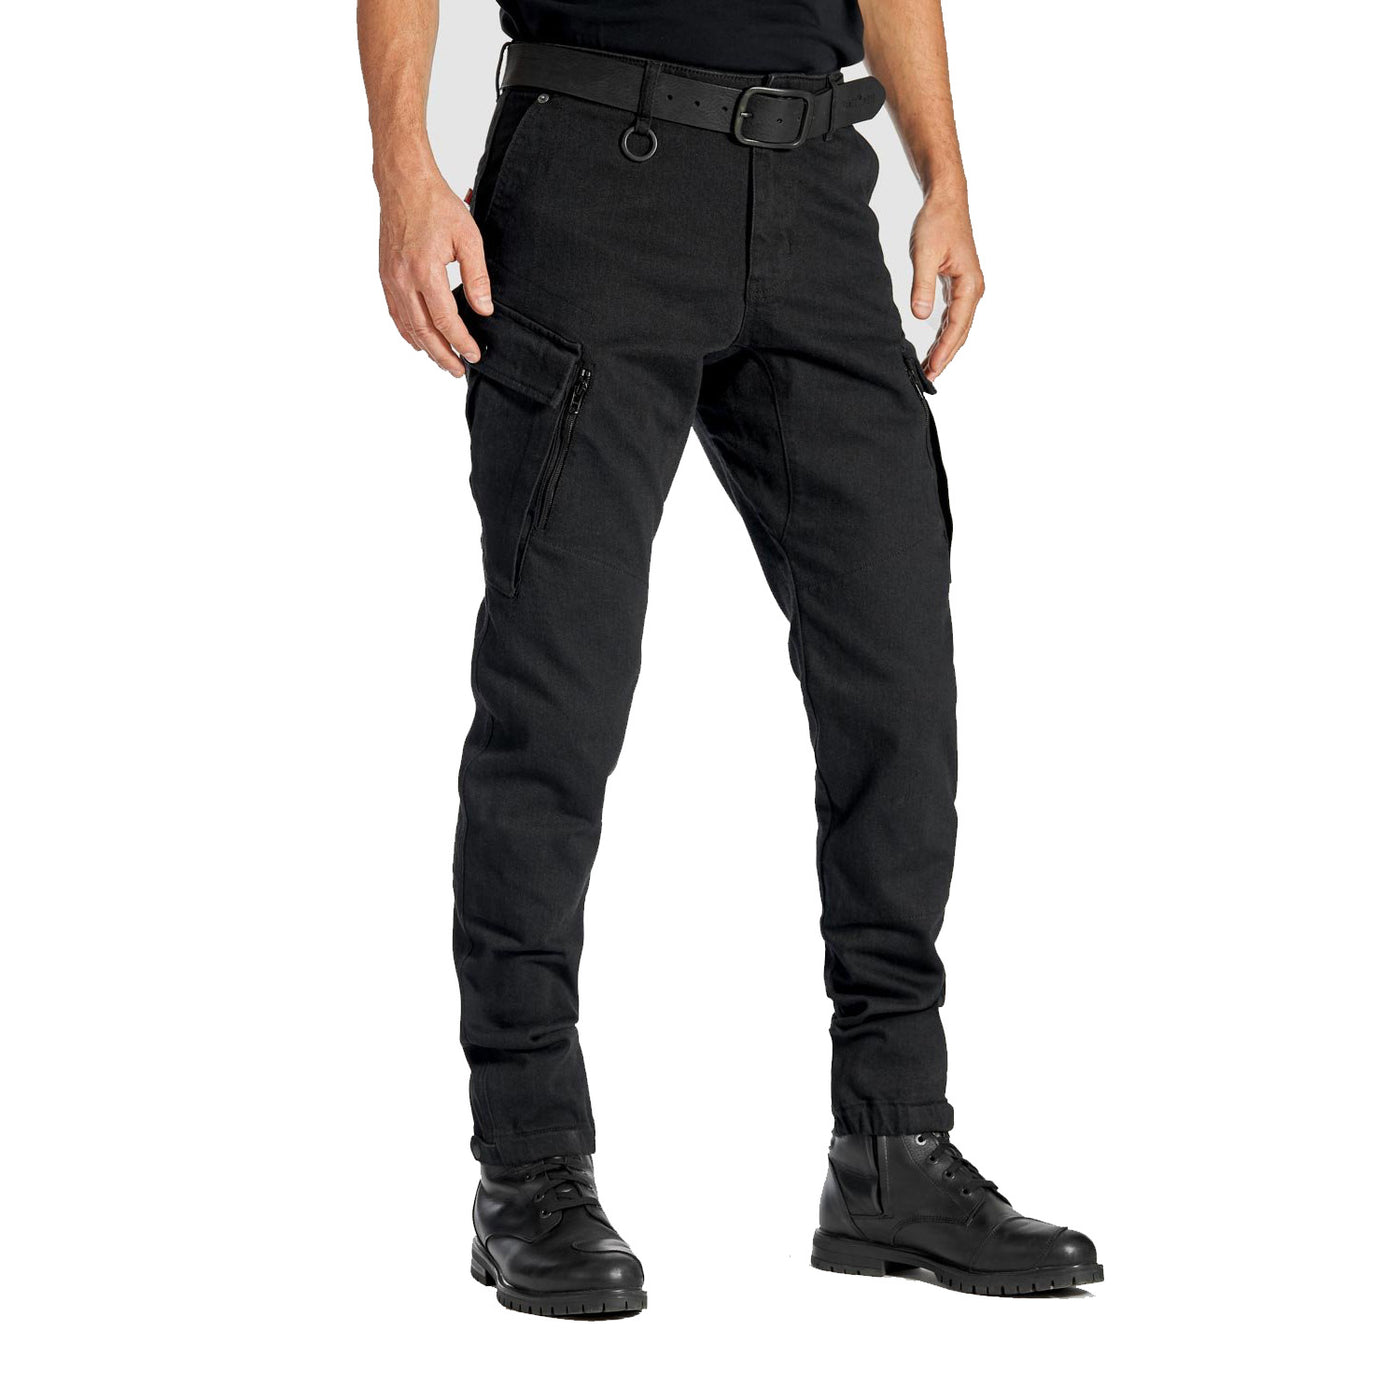 Motorcycle Jeans for Men - Black Chino Style Cordura®,  MARK KEV 01